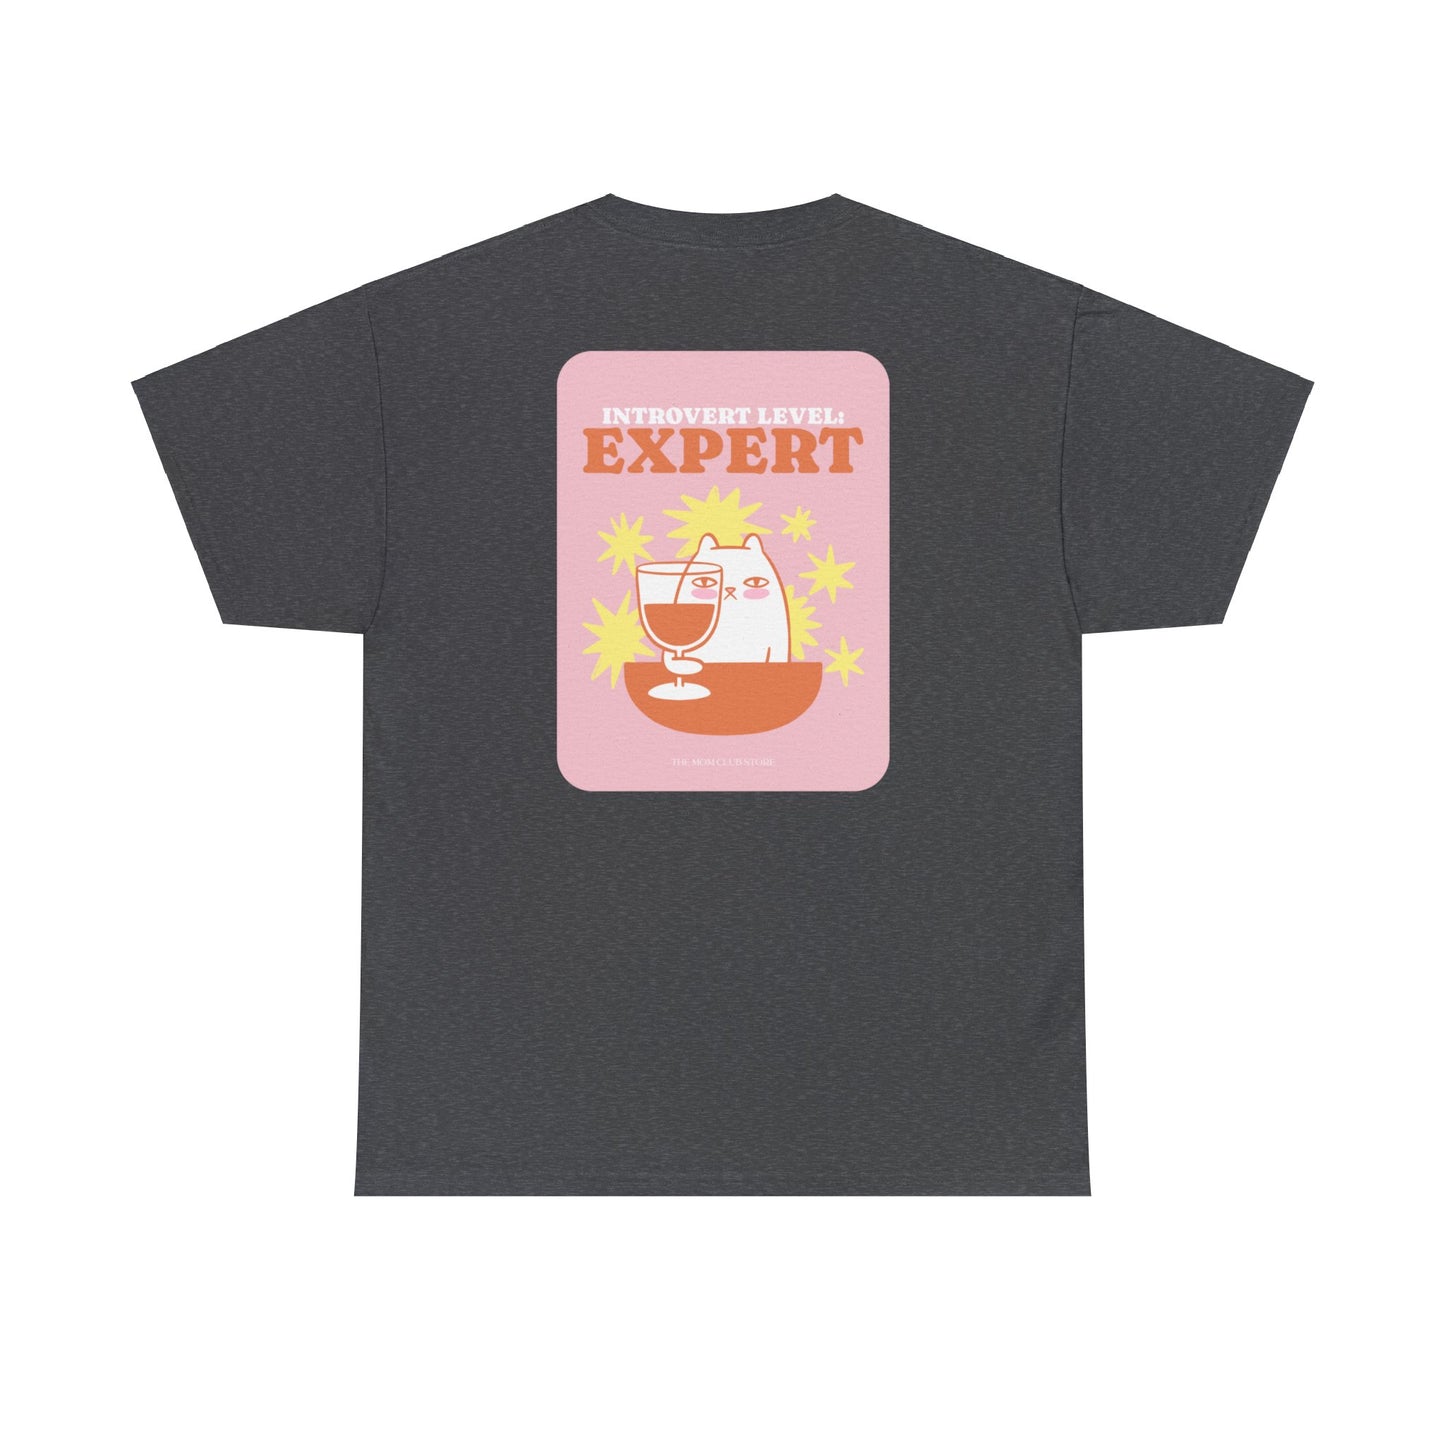 INTROVERT LEVEL EXPERT Unisex Printed Short-Sleeve T-Shirt for Adults